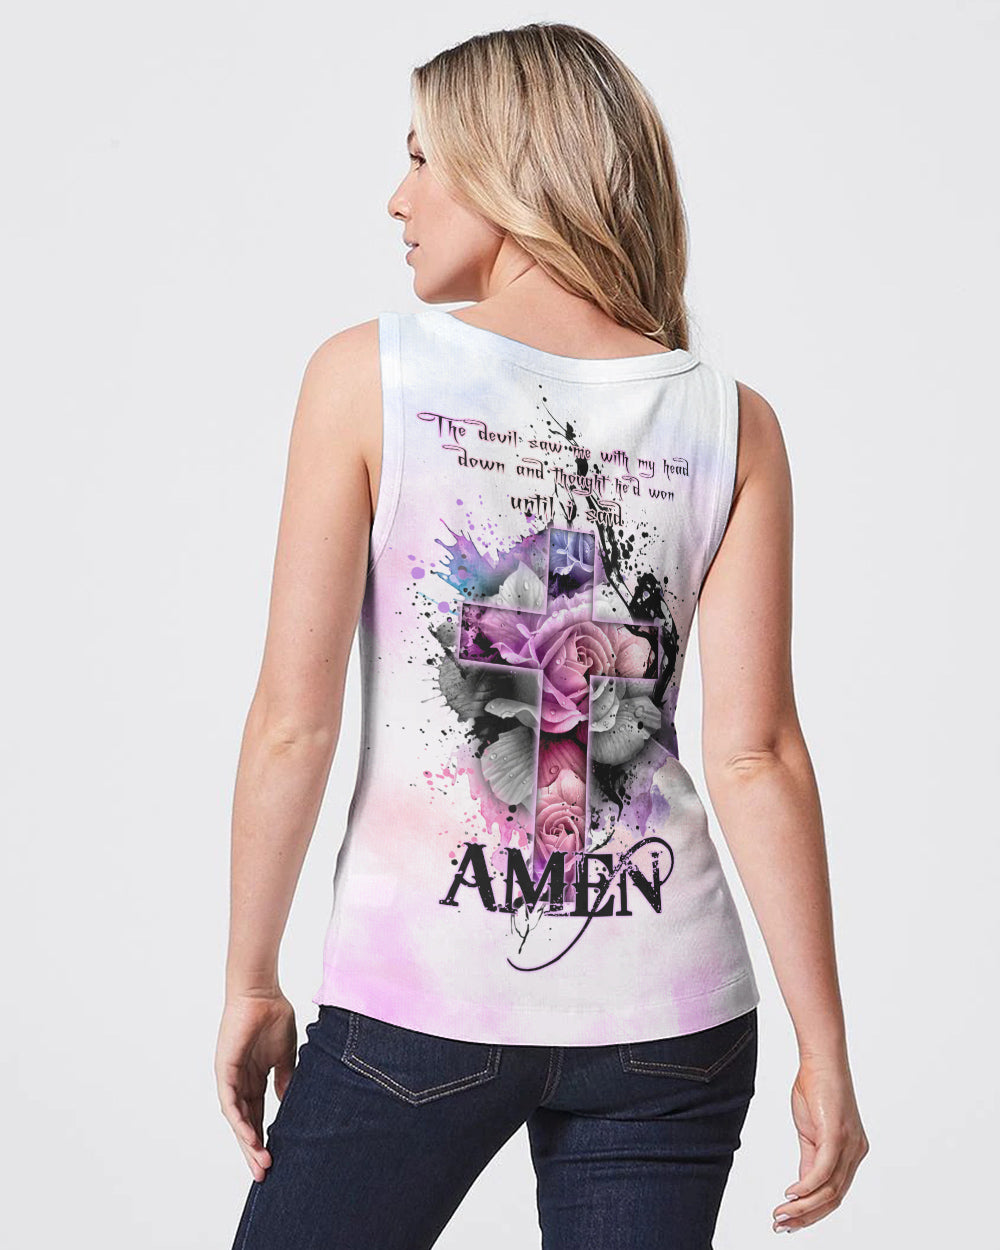 The Devil Saw Me With My Head Down Rose Cross Women's Christian Tanks